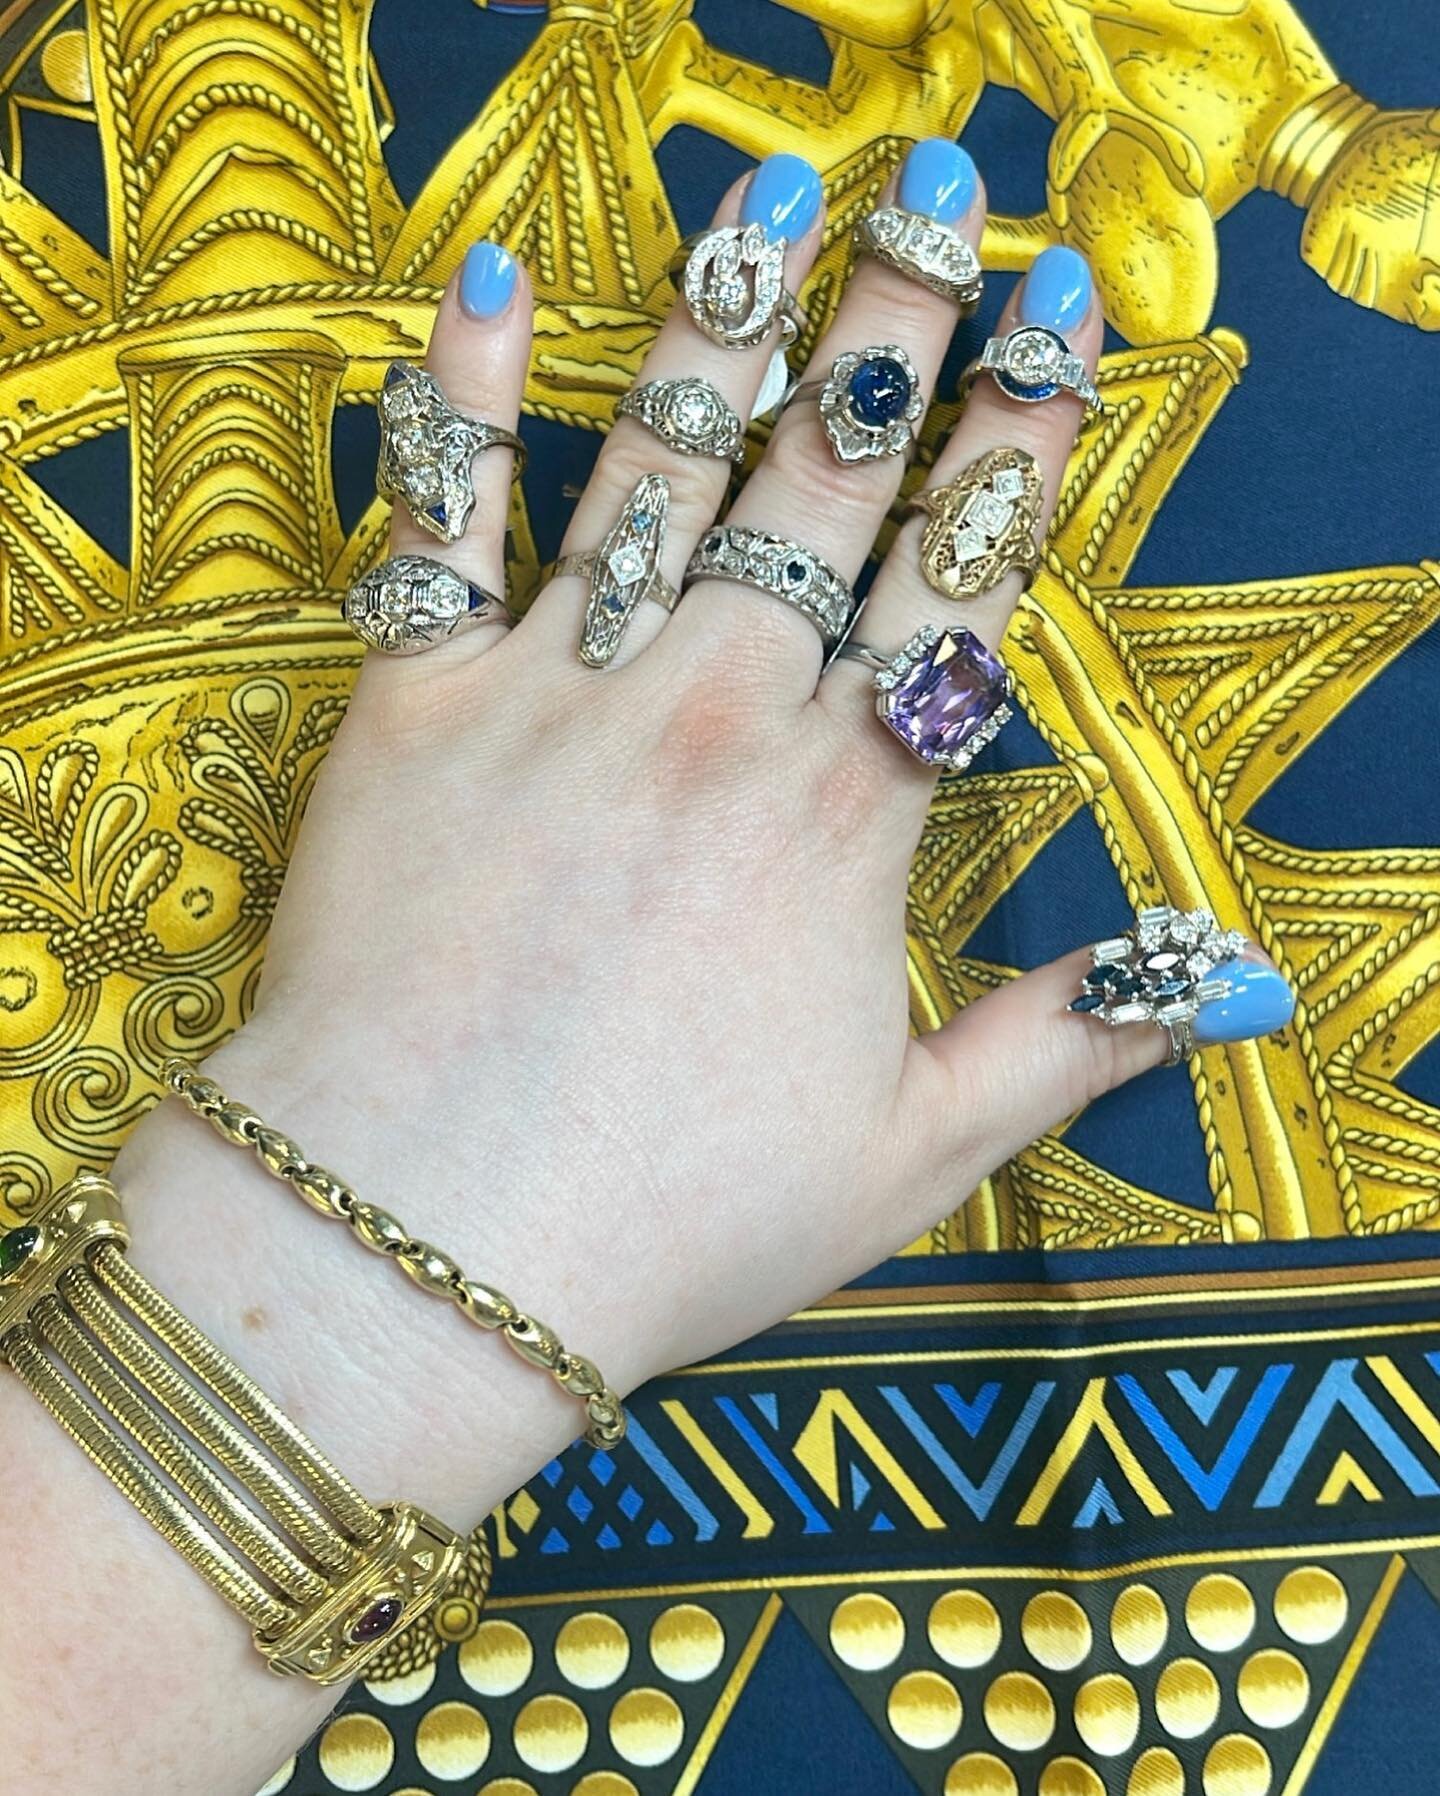 Getting ready for Vegas! ✨✨✨@usantiqueshows✨✨✨

 #jewelrycollections #jewelrydesign #showmeyourstack #antiquejewelry #oneofakind #supportsmallbusiness #femaleentrepreneur #estatejewellery #diamonds